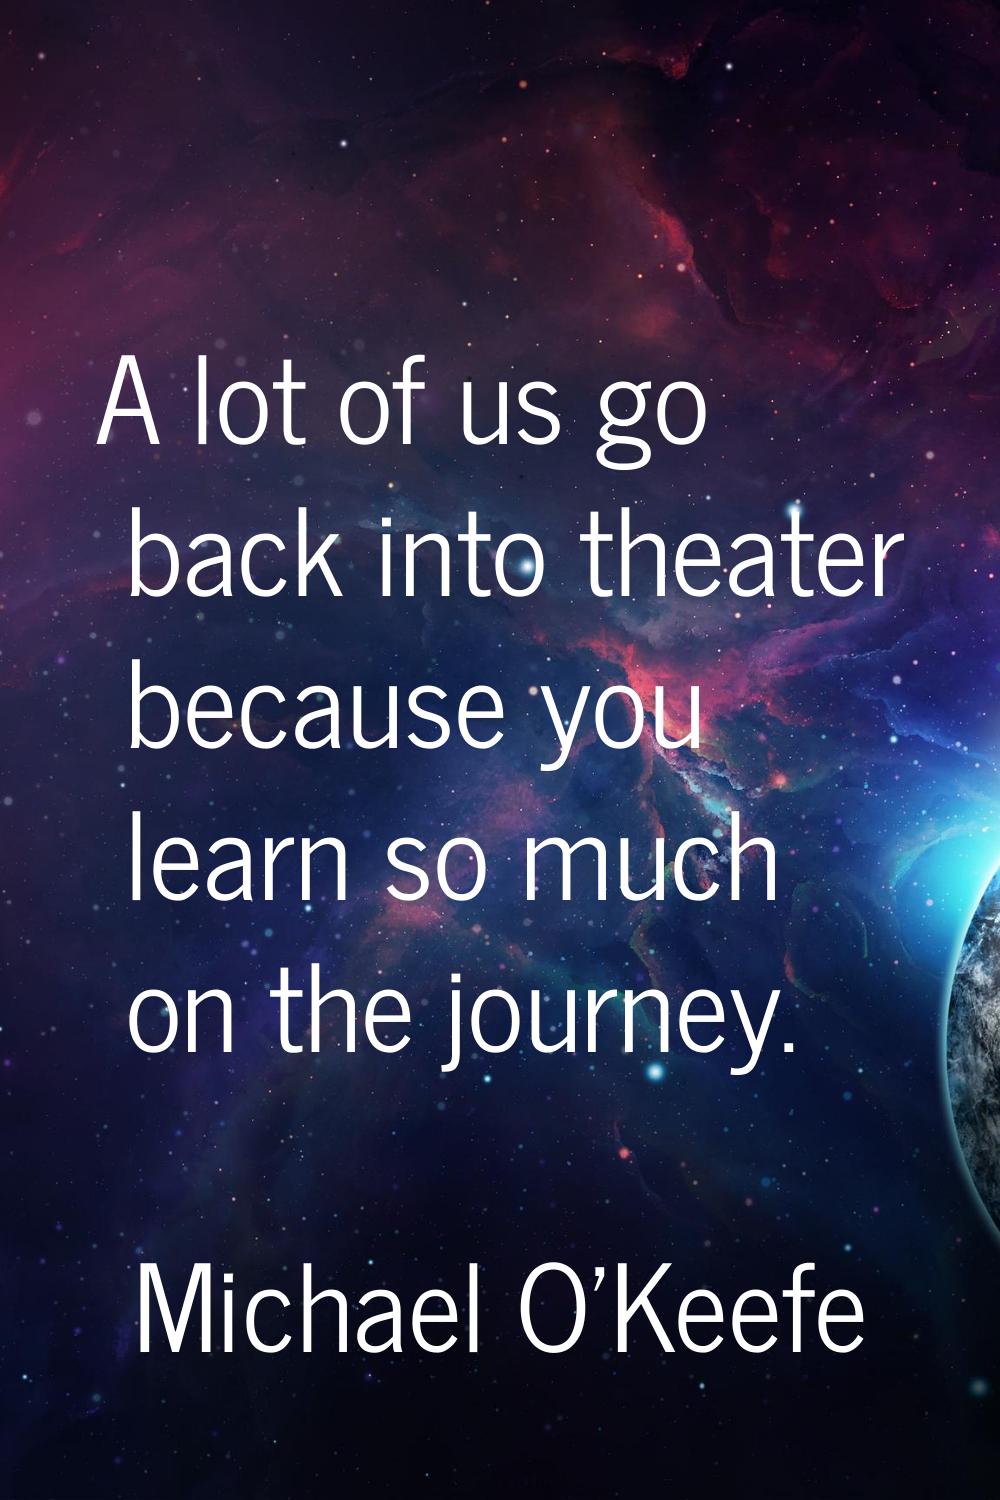 A lot of us go back into theater because you learn so much on the journey.